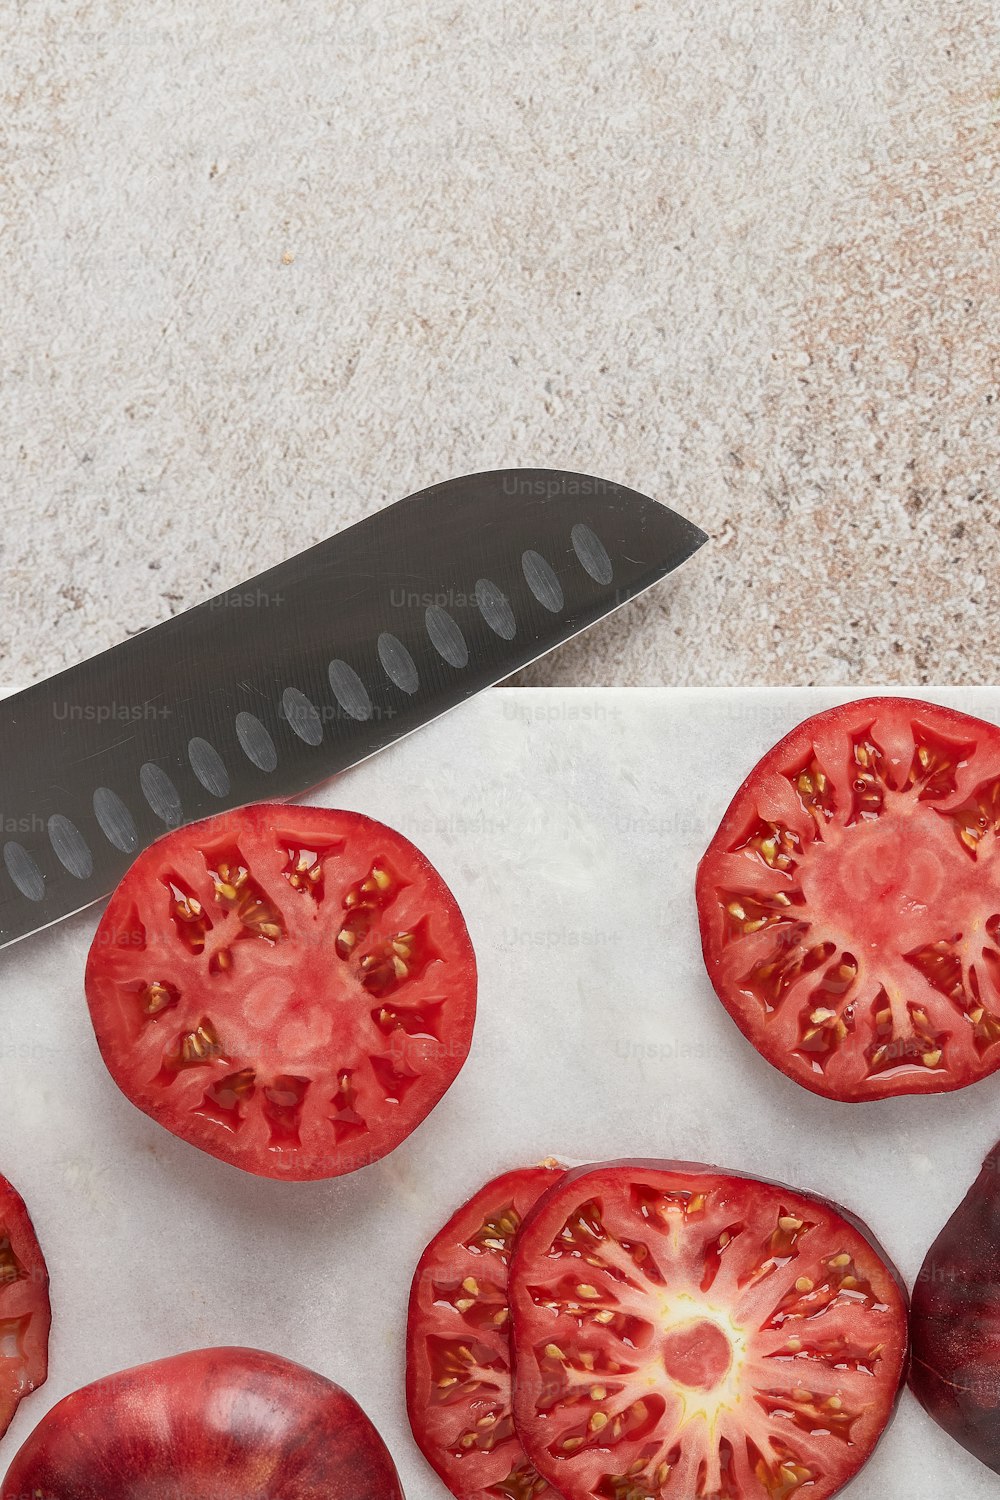 a knife and some tomatoes on a cutting board